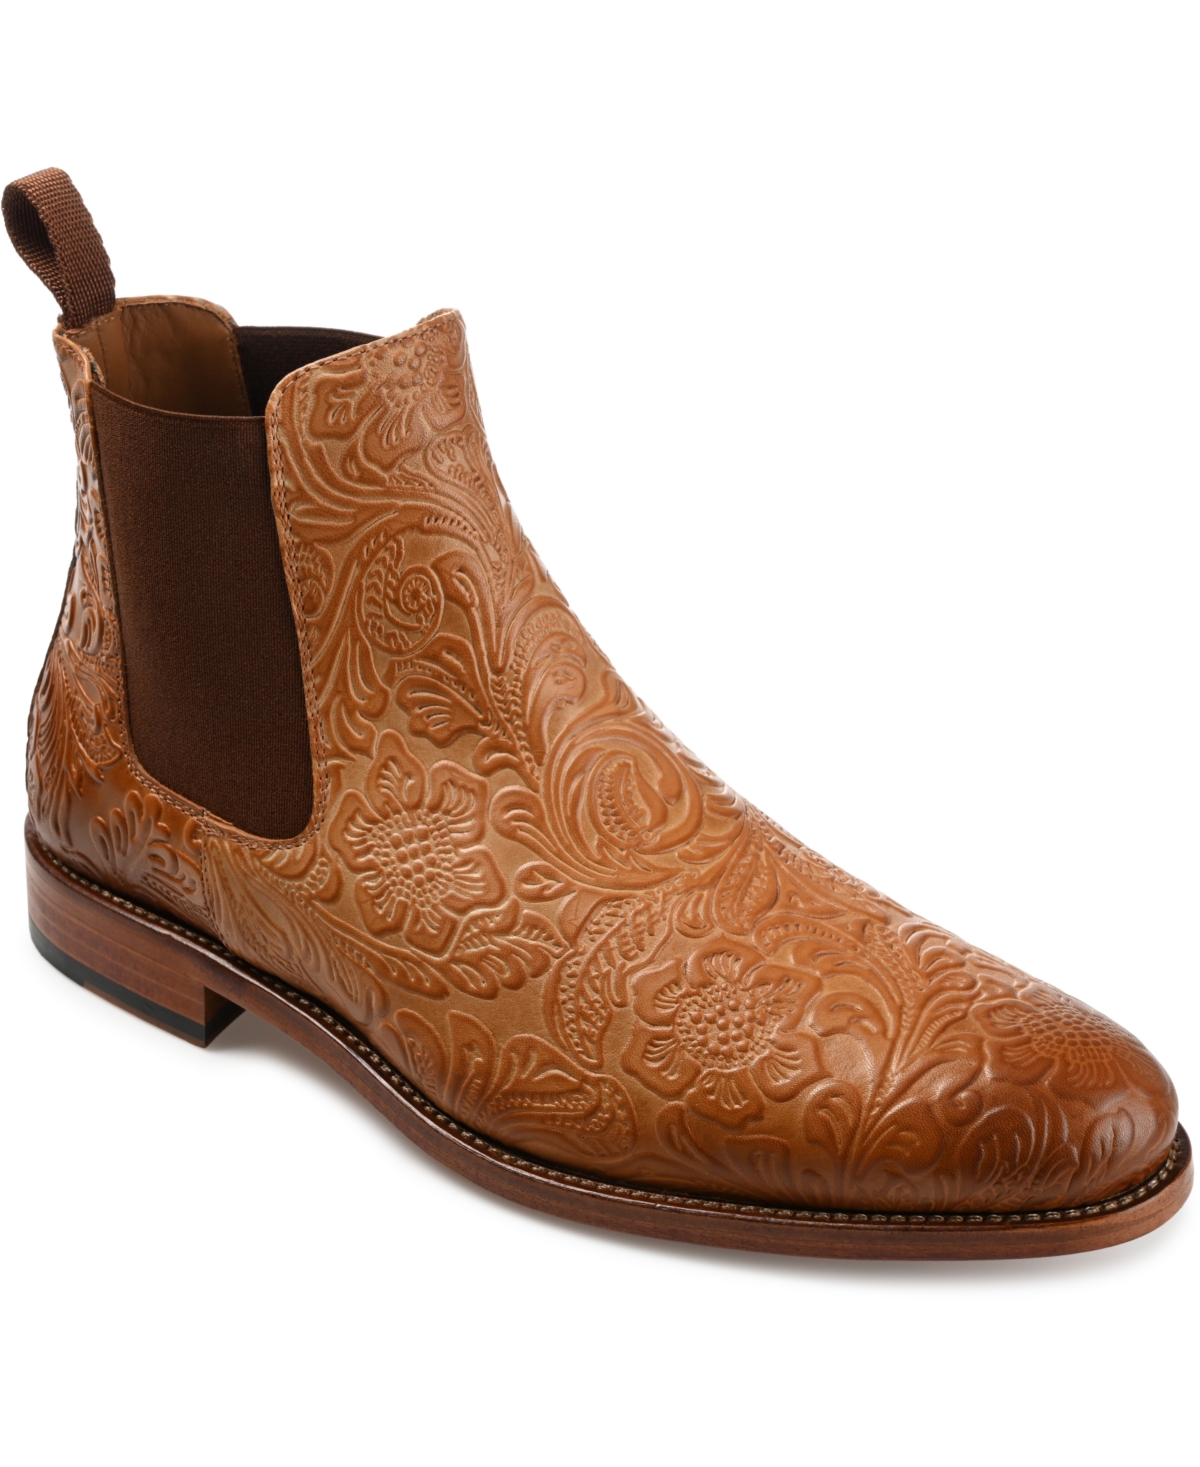 Men's Jude Floral Embossed Leather Chelsea Boots - Honey Floral